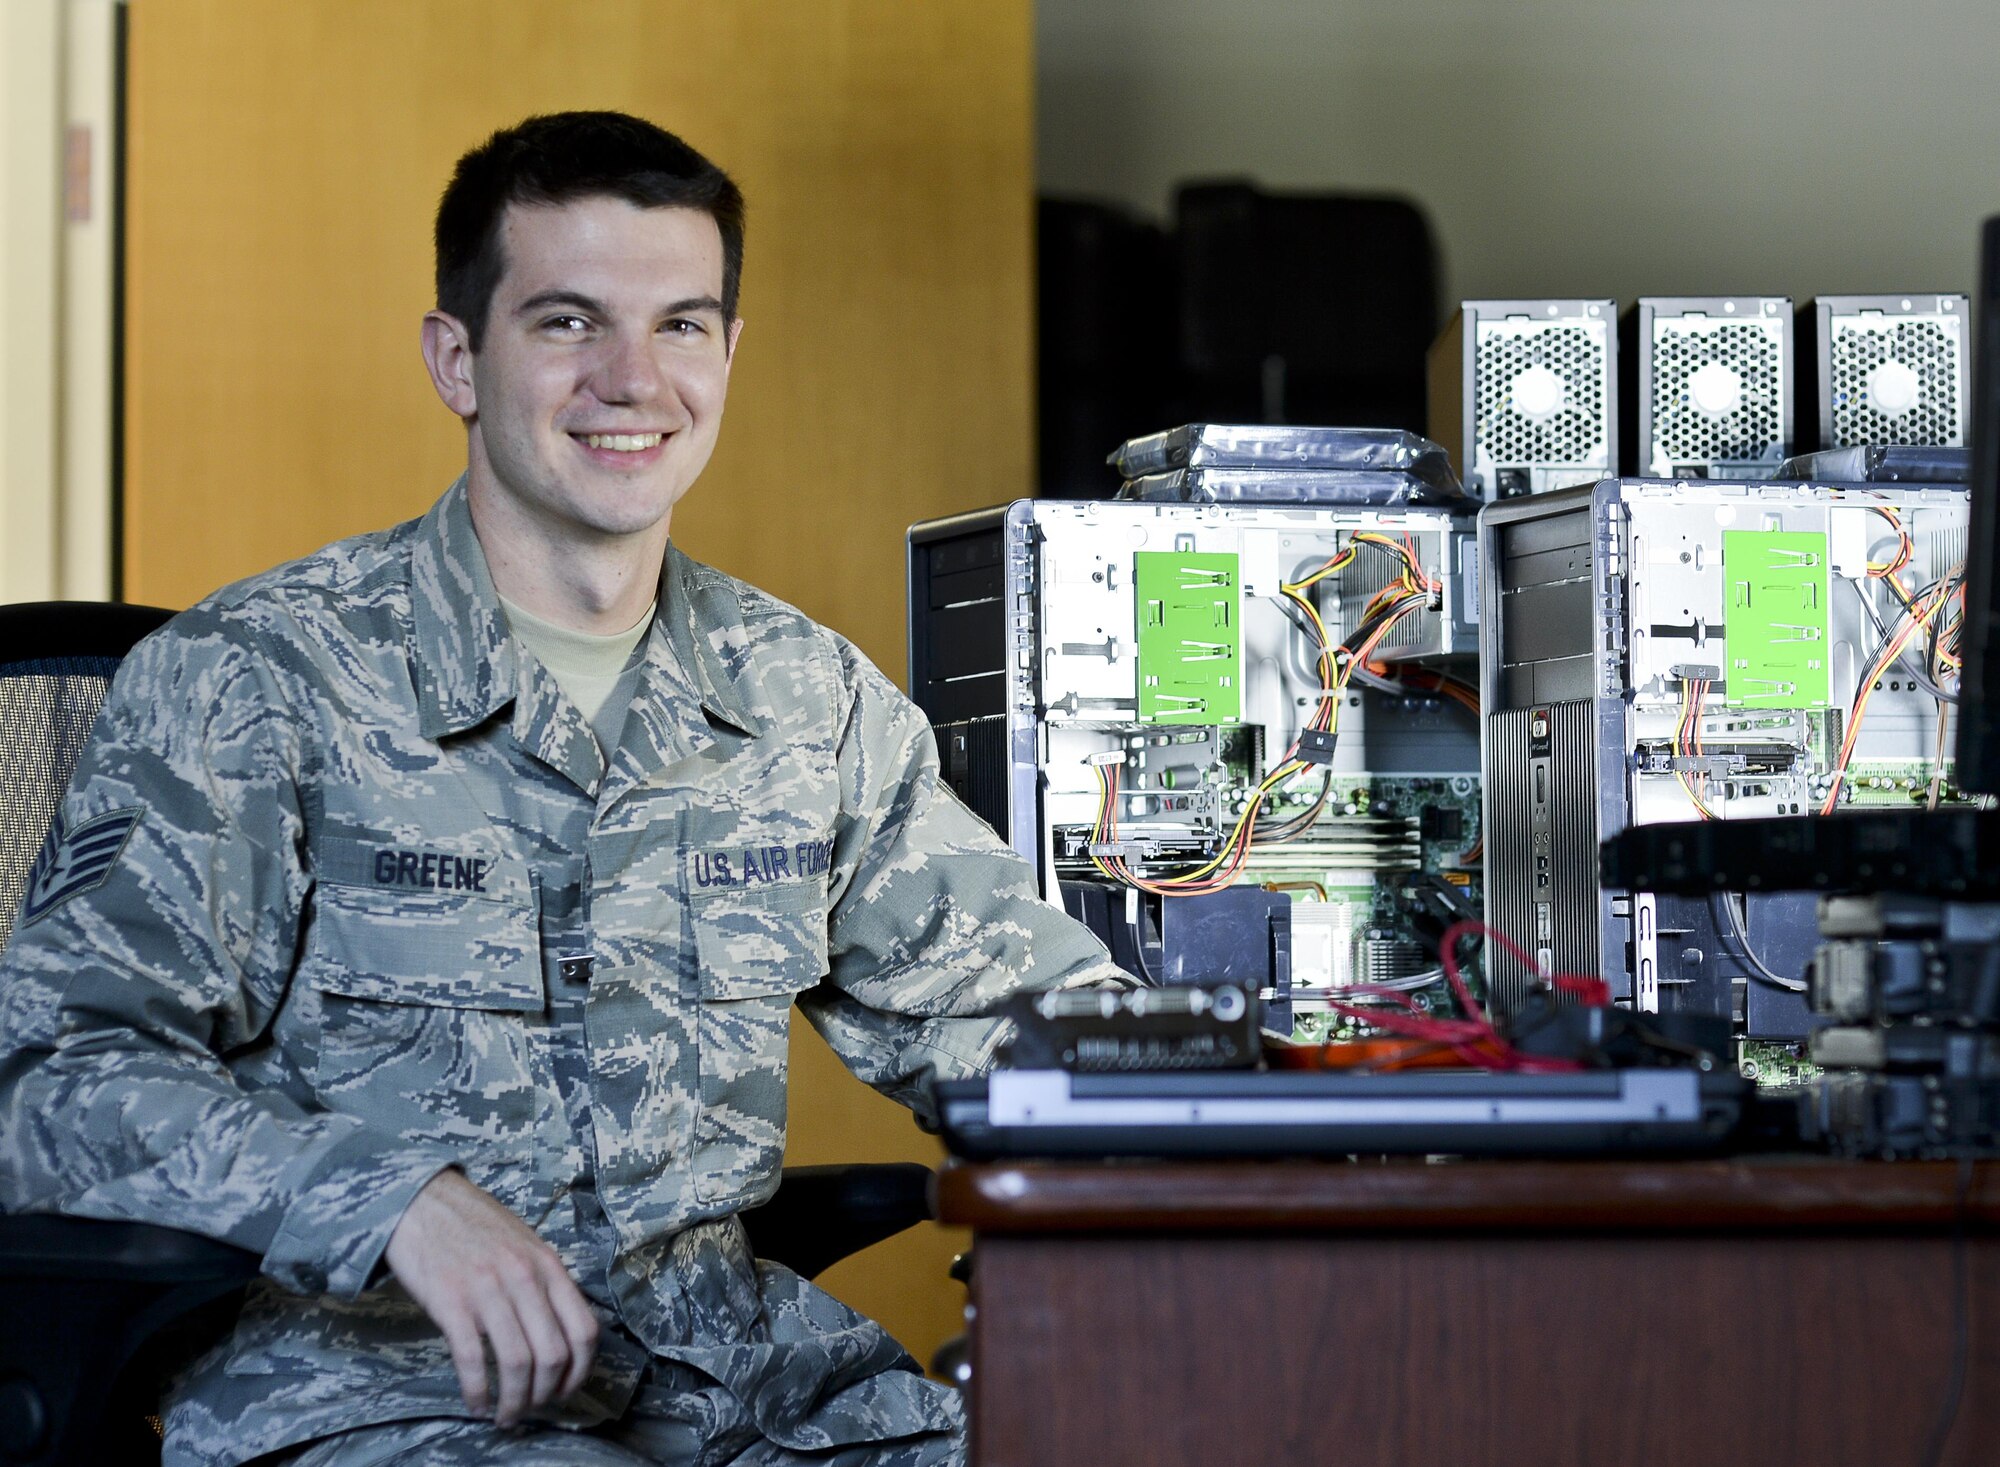 U.S. Air Force Staff Sgt. Sam M. Greene, 325th Communications Squadron client systems supervisor, sits next to network computers at Tyndall Air Force Base, Fla., Aug. 3, 2016. Greene leads a small team of Airmen responsible for installing and maintaining computer hardware, software and a new base-wide voice over internet protocol phone service. (U.S. Air Force photo by Tech. Sgt. Javier Cruz Jr./Released)